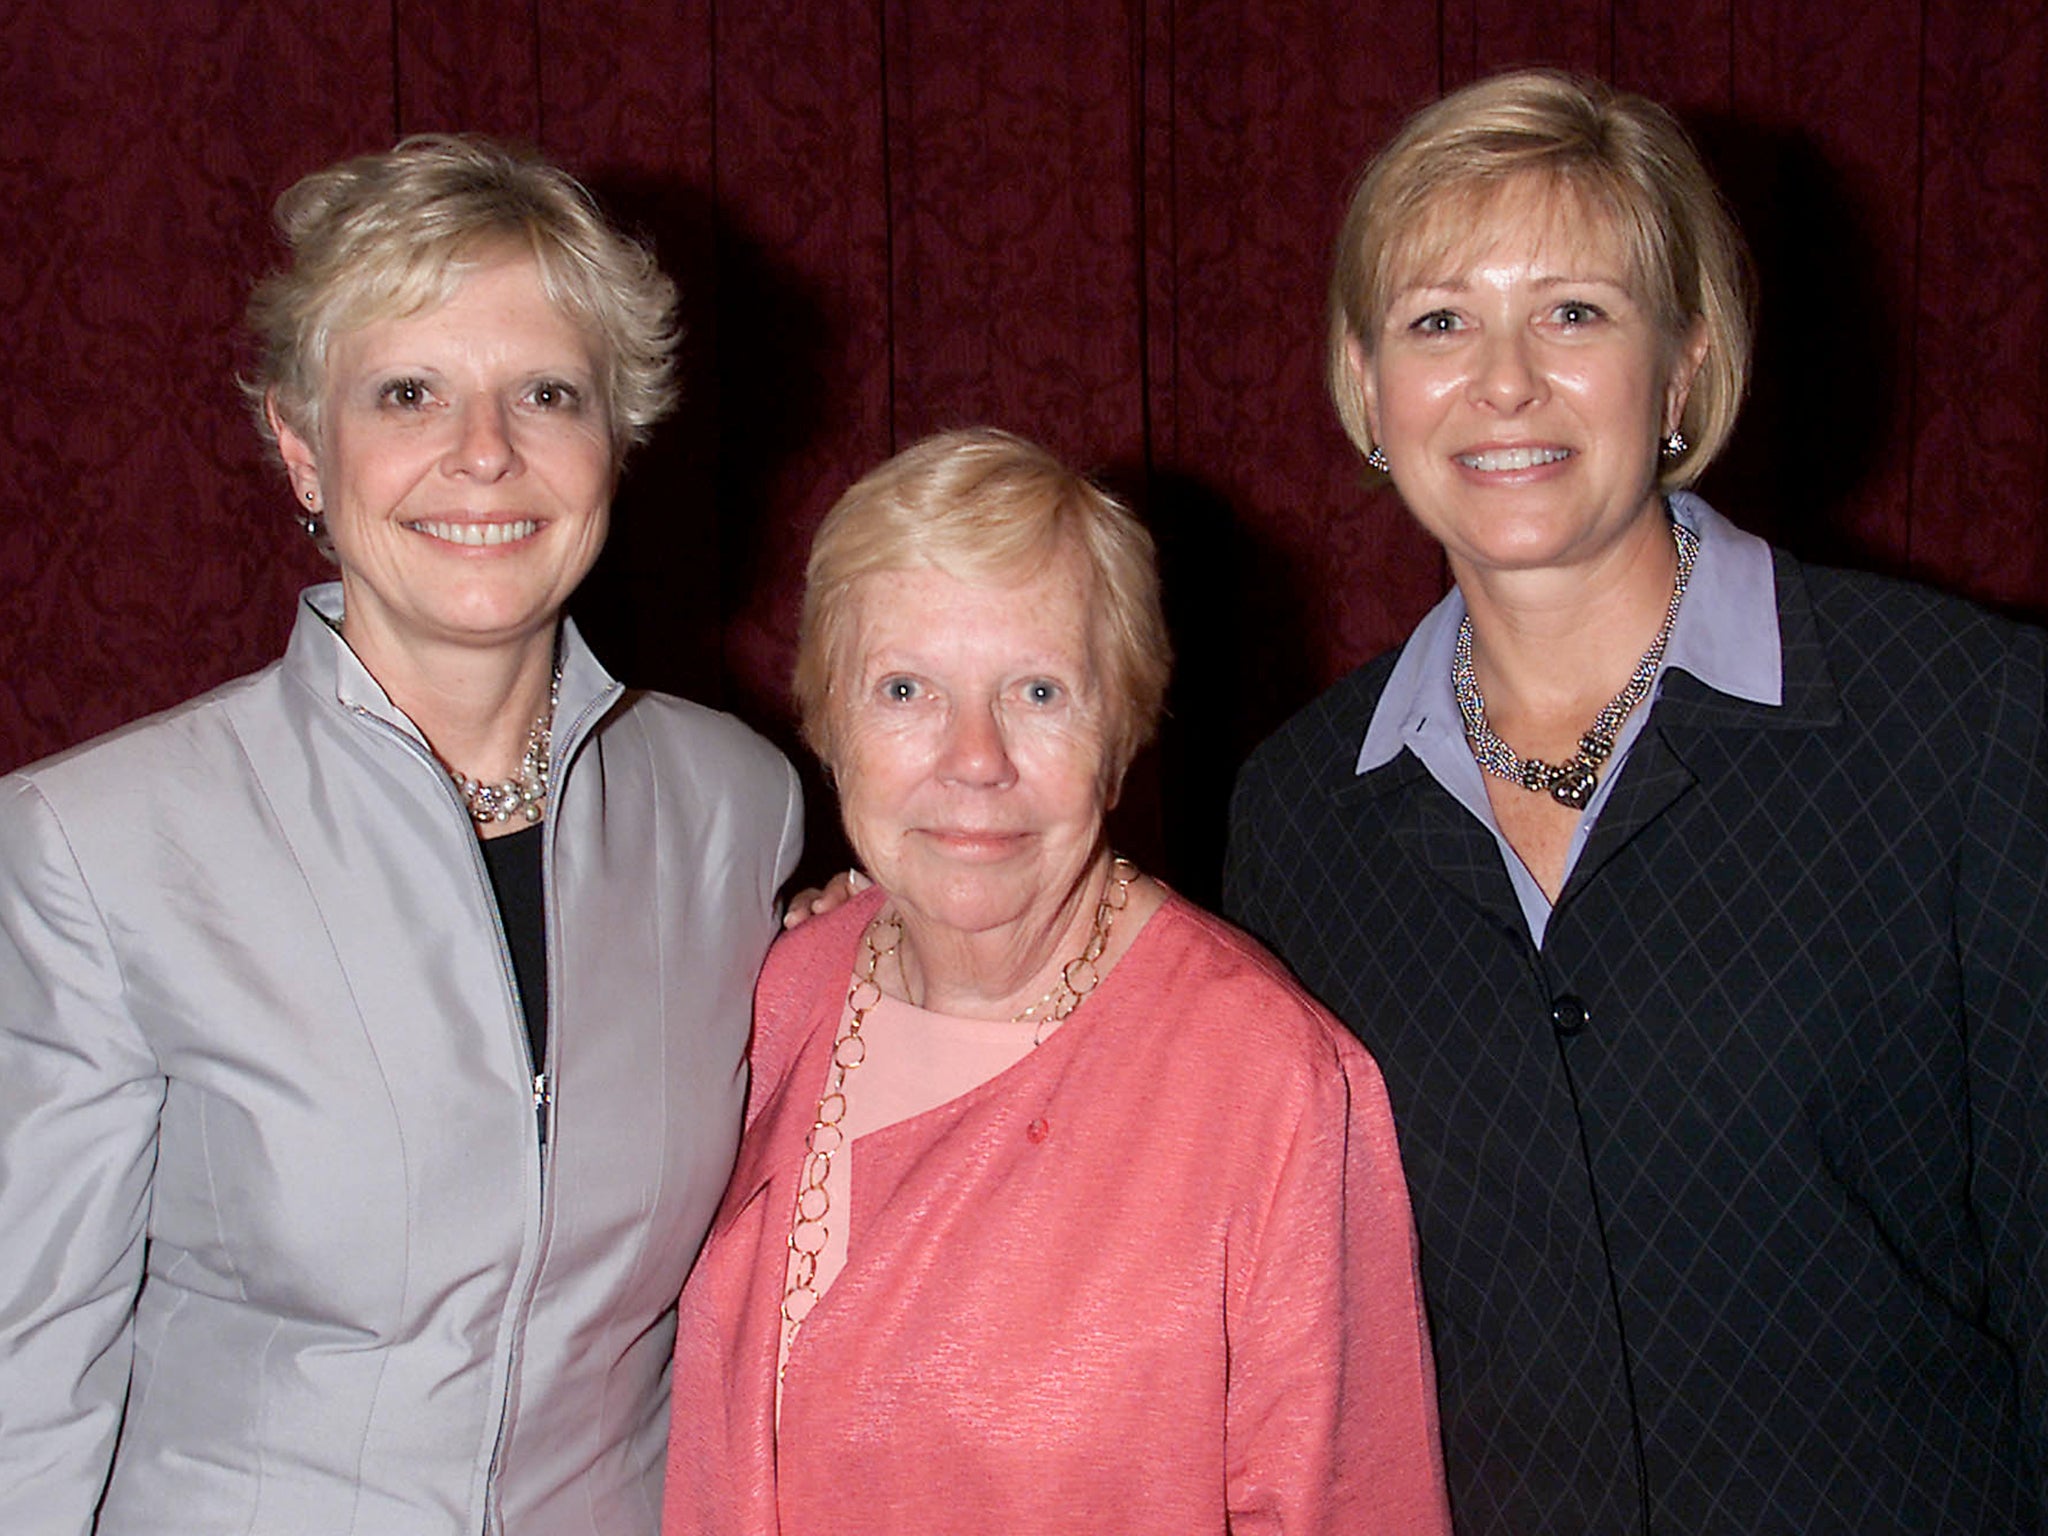 Maas (centre) at the Women to Watch advertising awards luncheon New York in 2001